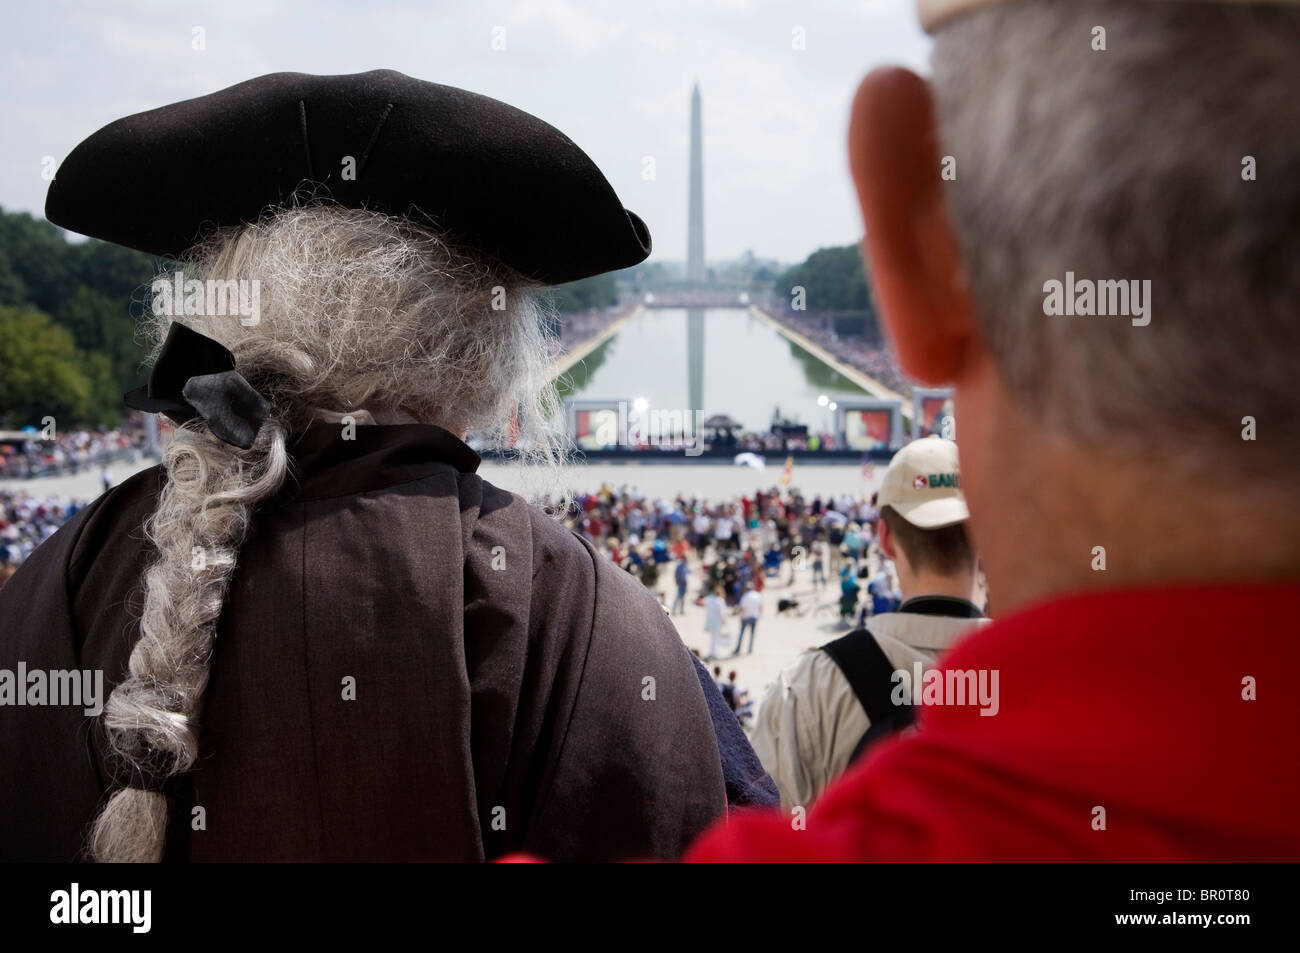 The Restoring Honor rally held at the Lincoln Memorial on the National Mall.  Stock Photo